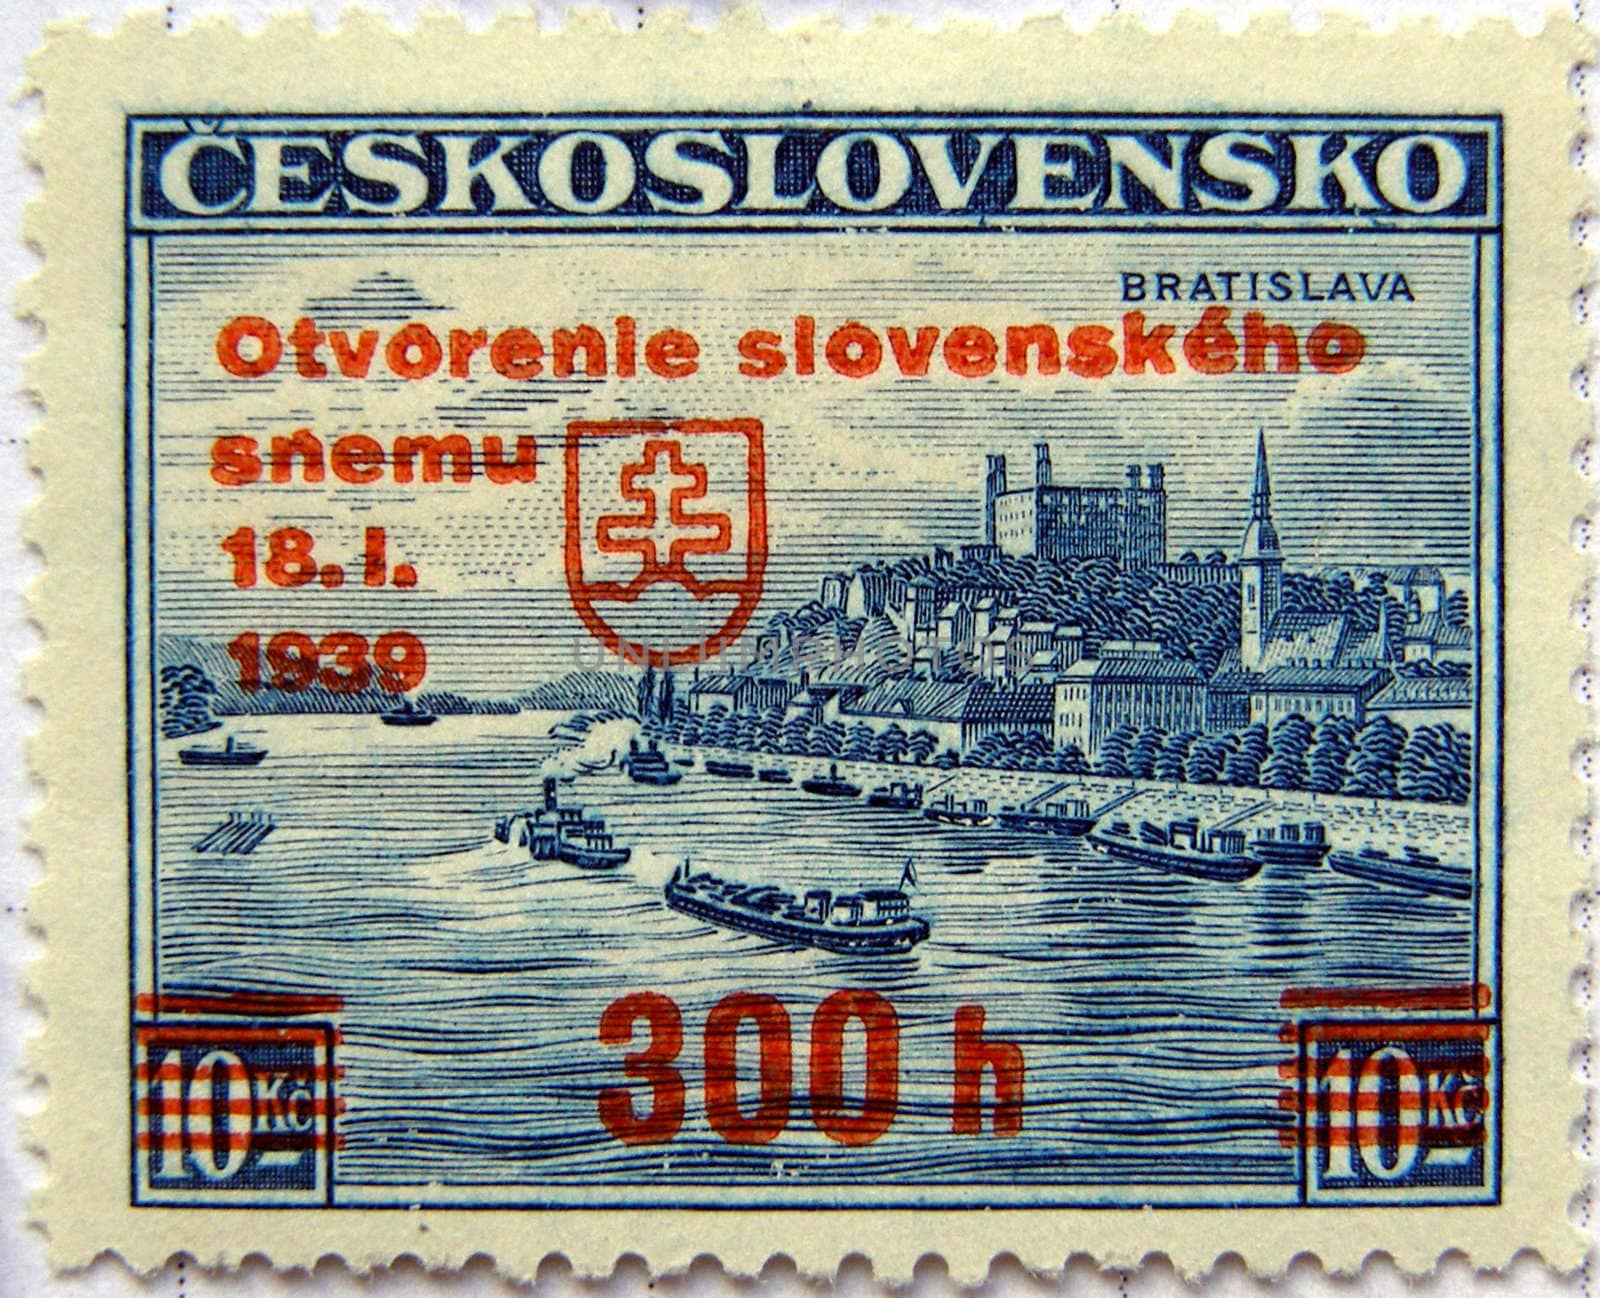 Czechoslovakian stamp by paolo77